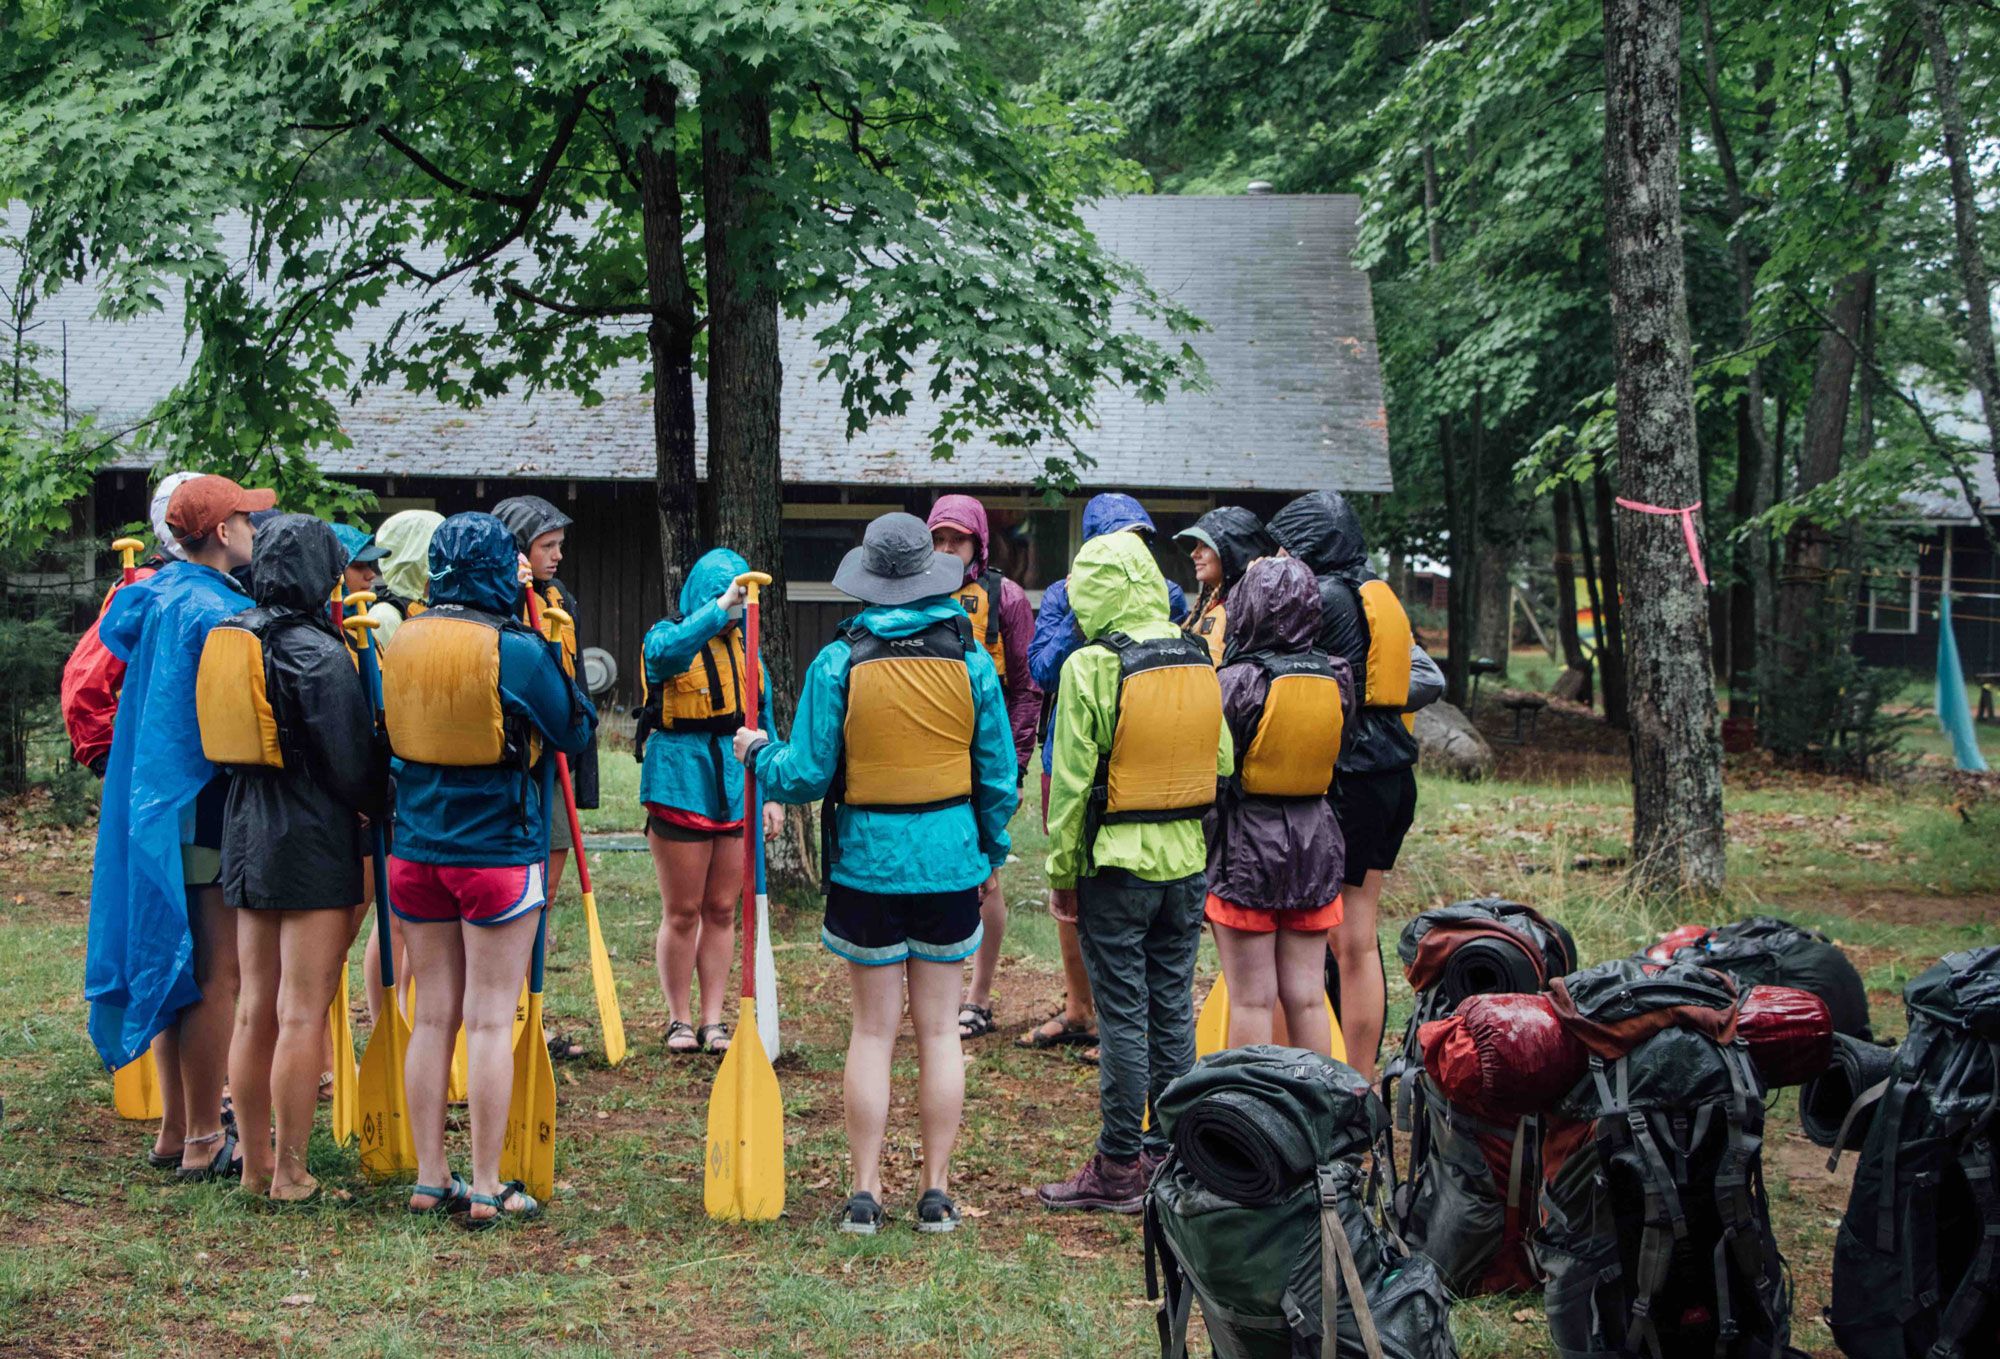 Even if it rains, campers go out on their wilderness trip! The packing list is designed to prepare your camper to go on a rainy trip. If severe weather is forecasted, we adjust trip plans accordingly.